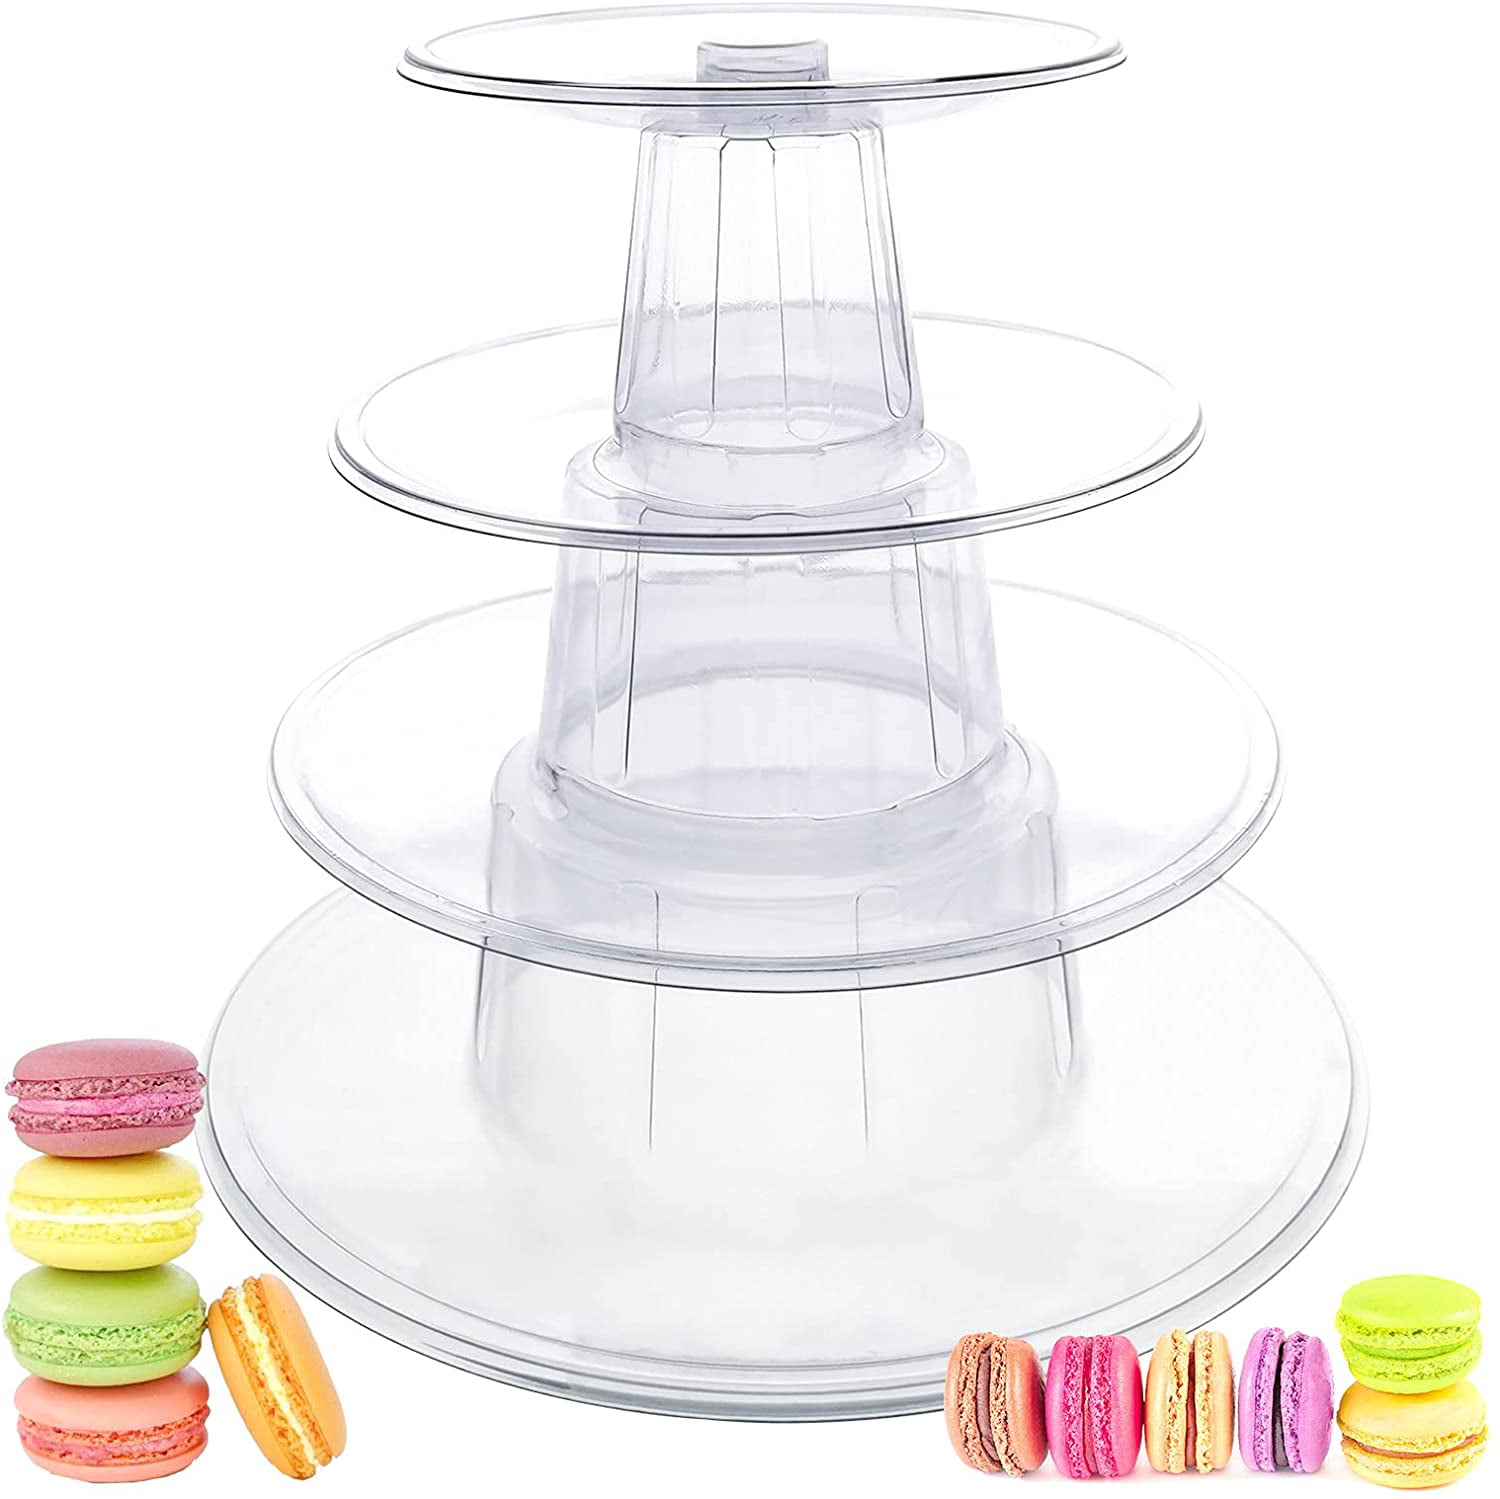 9 Tiers Macaron Tower Cake Stand Cupcake Holder Birthday Wedding Party Decor  a 